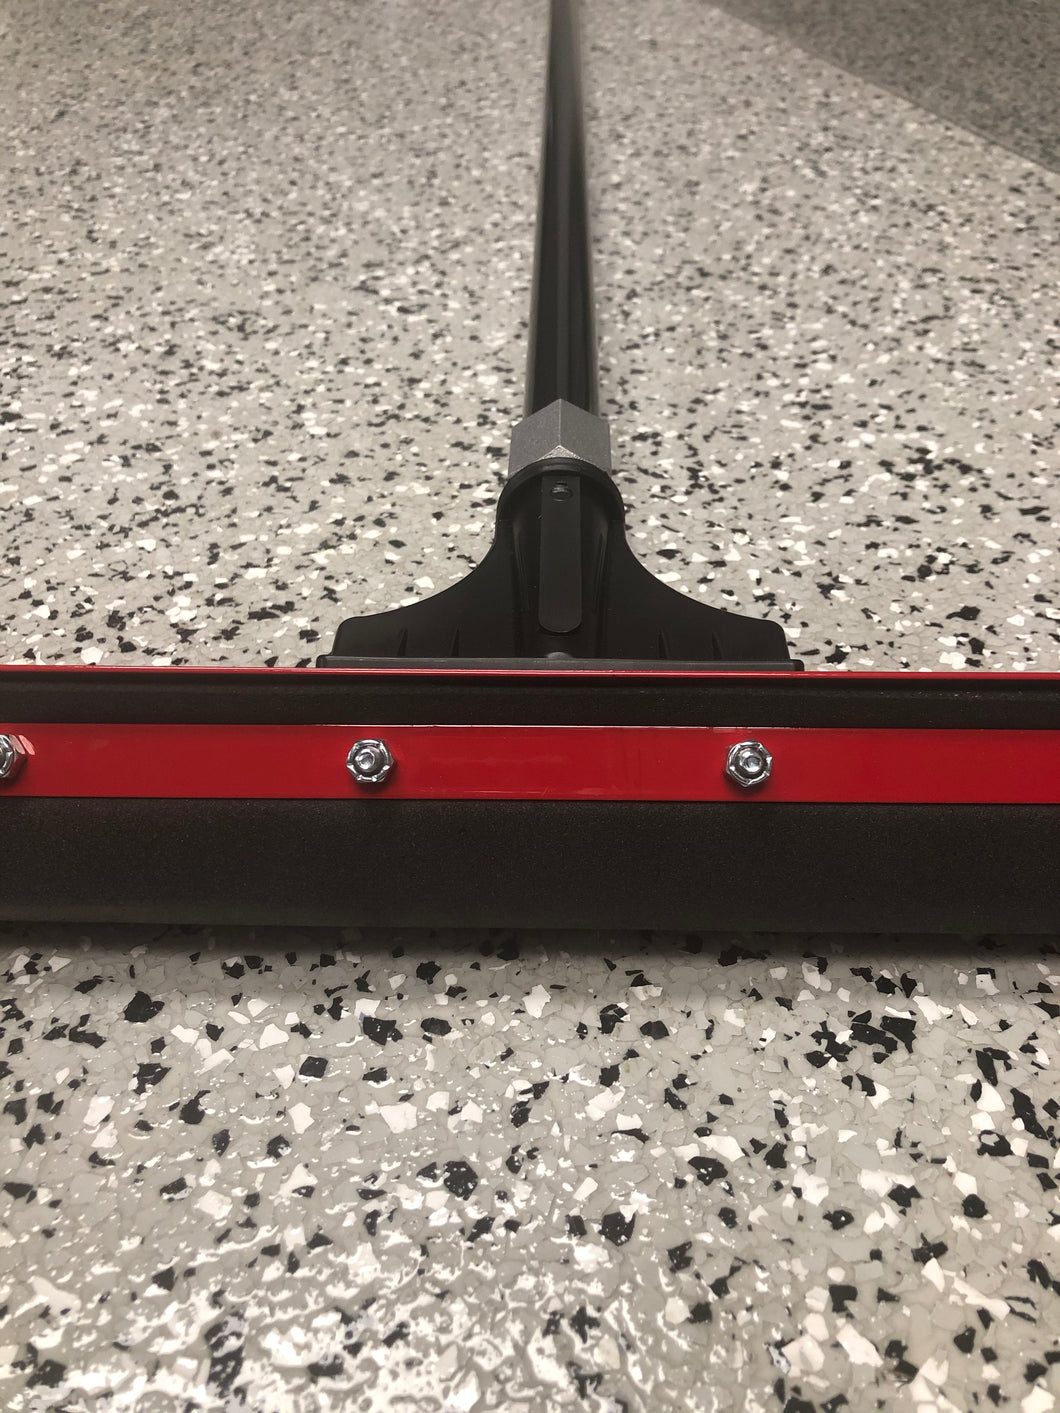 OEM Black Foam Squeegees for Cleaning Epoxy Floor - China Squeegee and  Construction Tool price